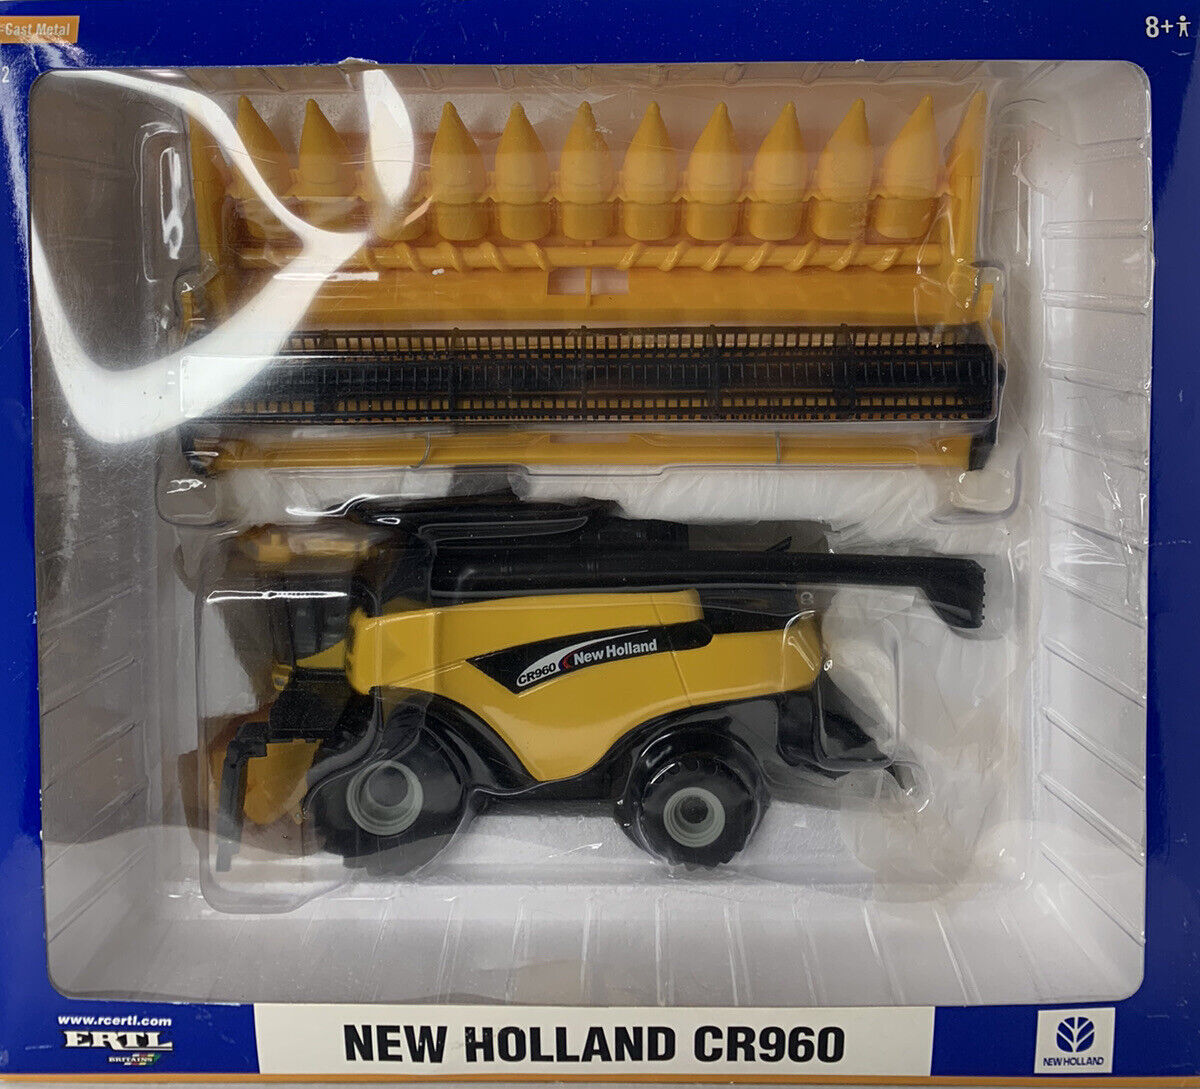 We OFFer at cheap prices New Holland CR960 COMBINE 32 1 Topics on TV